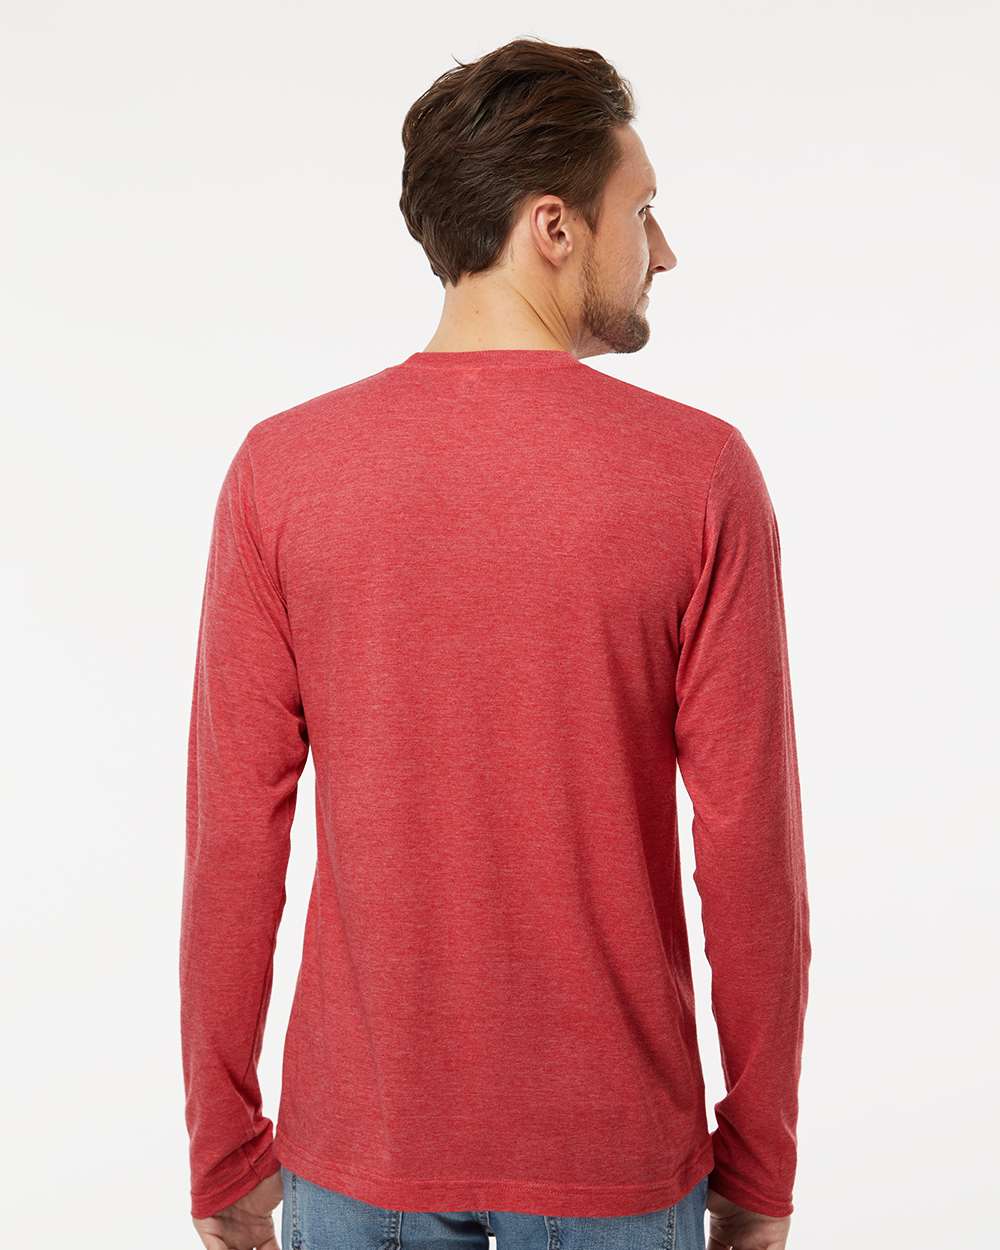 M&O Poly-Blend Long Sleeve T-Shirt 3520 #colormdl_Heather Red